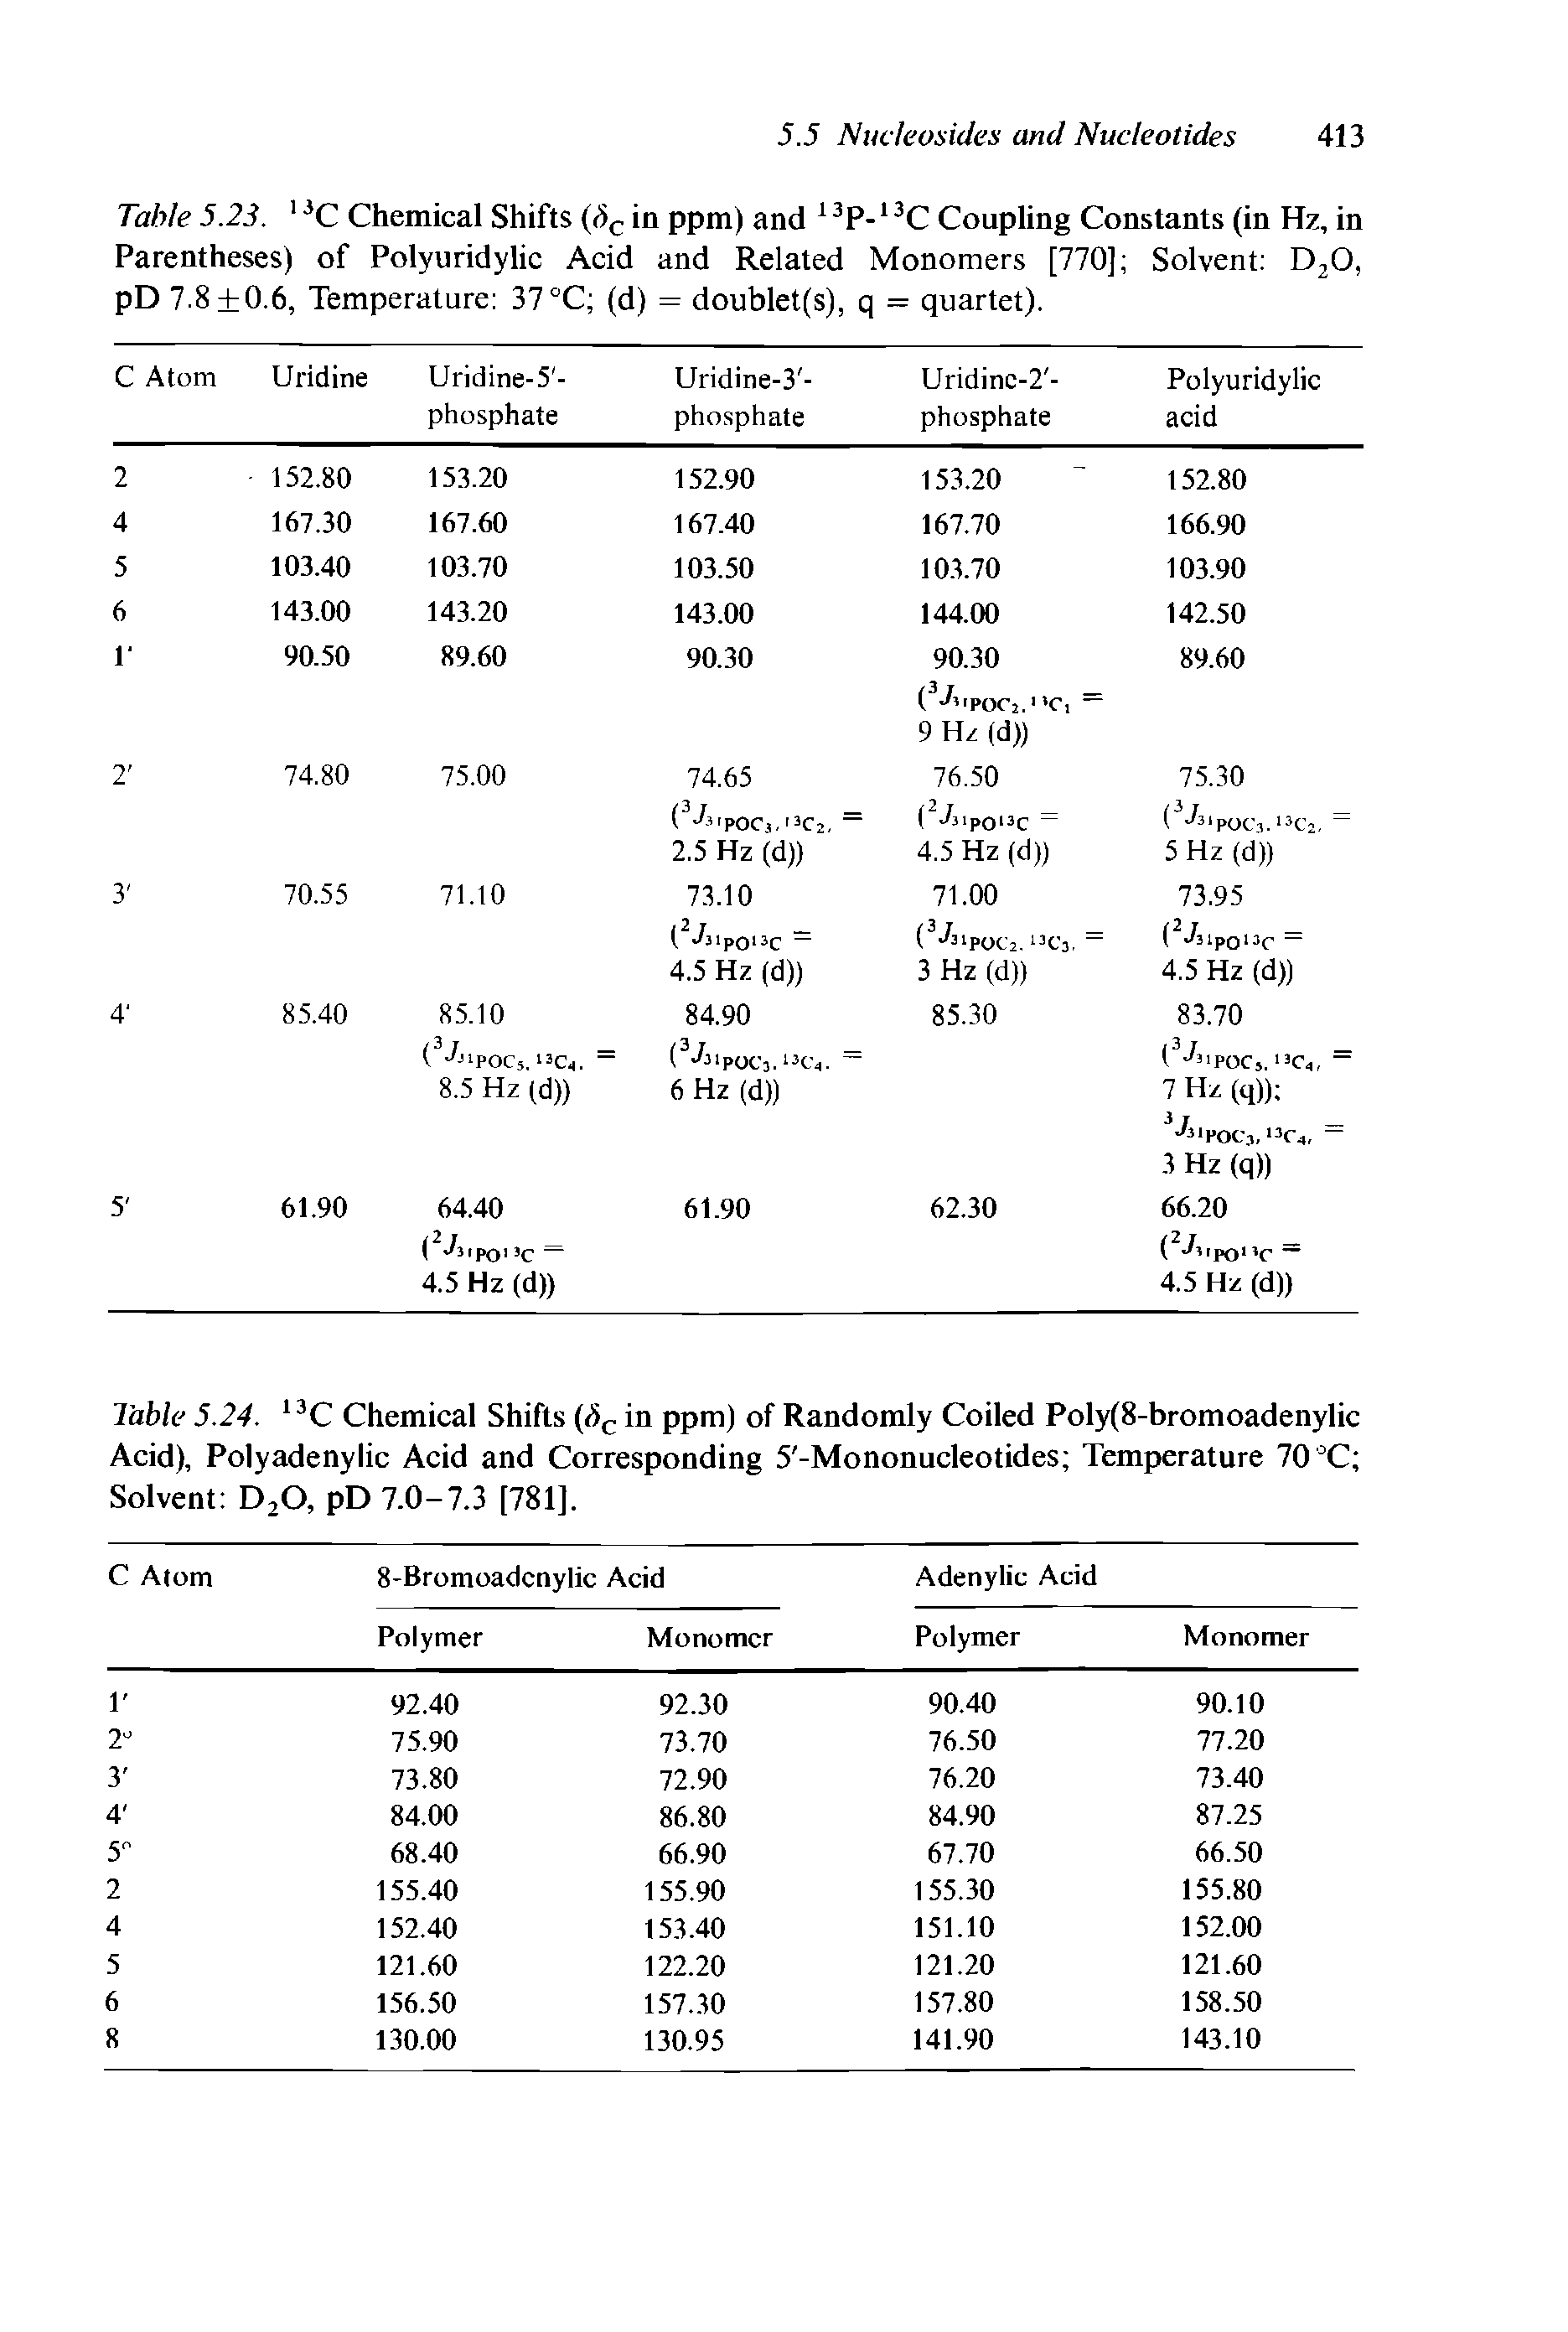 Table 5.24. 13C Chemical Shifts (6C in ppm) of Randomly Coiled Poly(8-bromoadenylic Acid), Polyadenylic Acid and Corresponding 5 -Mononucleotides Temperature 70 °C Solvent D2Q, pD 7.0-7.3 [781],...